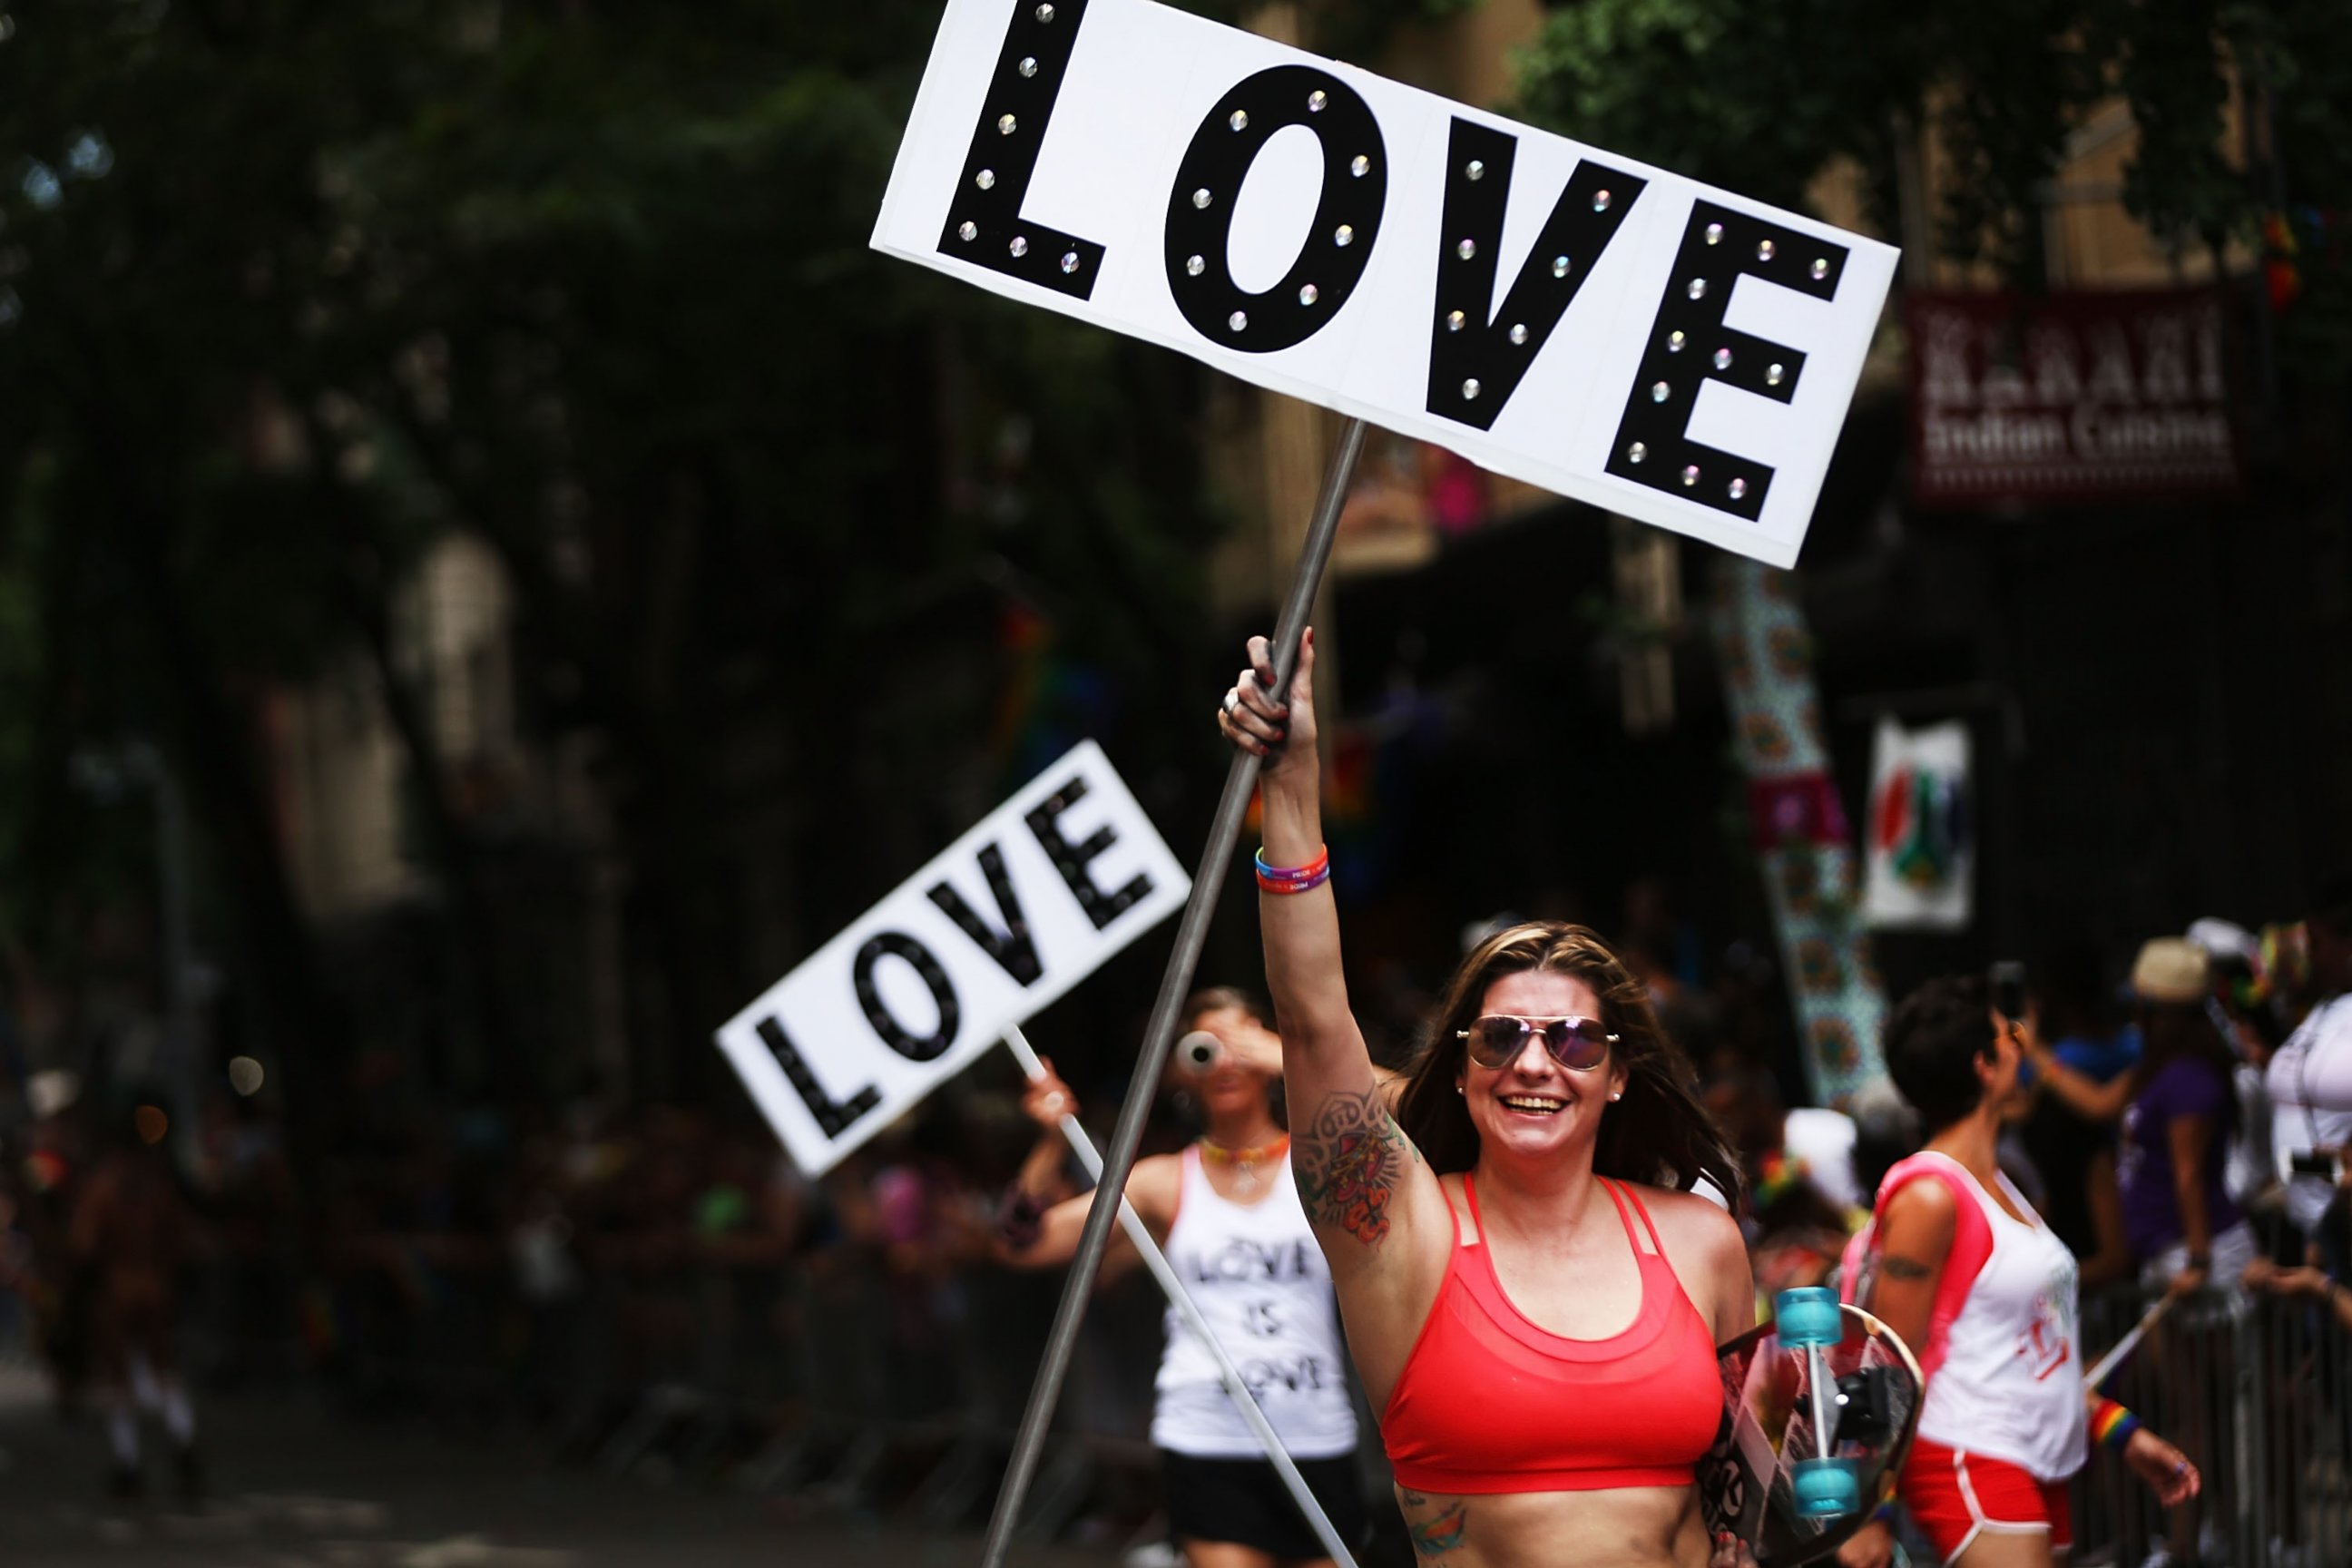 PHOTO: Participants in the annual New York Gay Pride Parade march in the West Village in Manhattan, June 25, 2017 in New York City. 